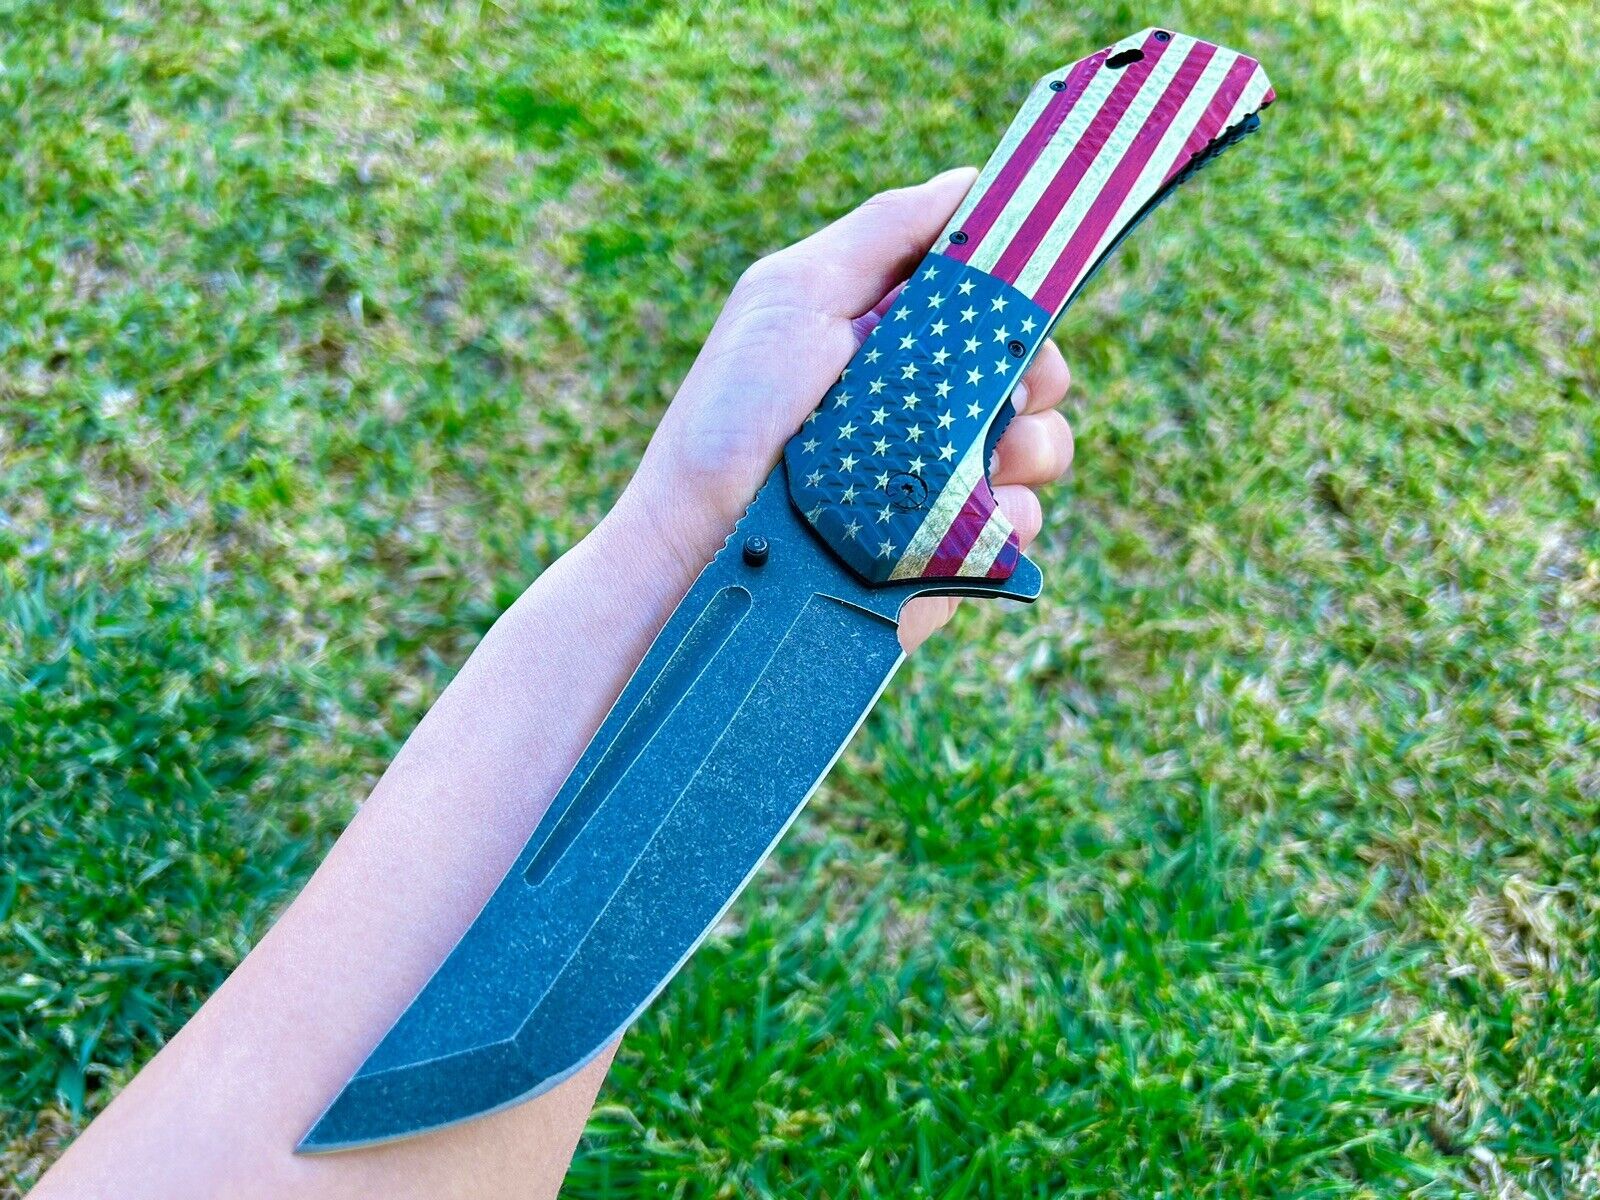 12.25” Giant USA Flag Tactical Spring Assisted Open Blade Pocket Knife Hunting